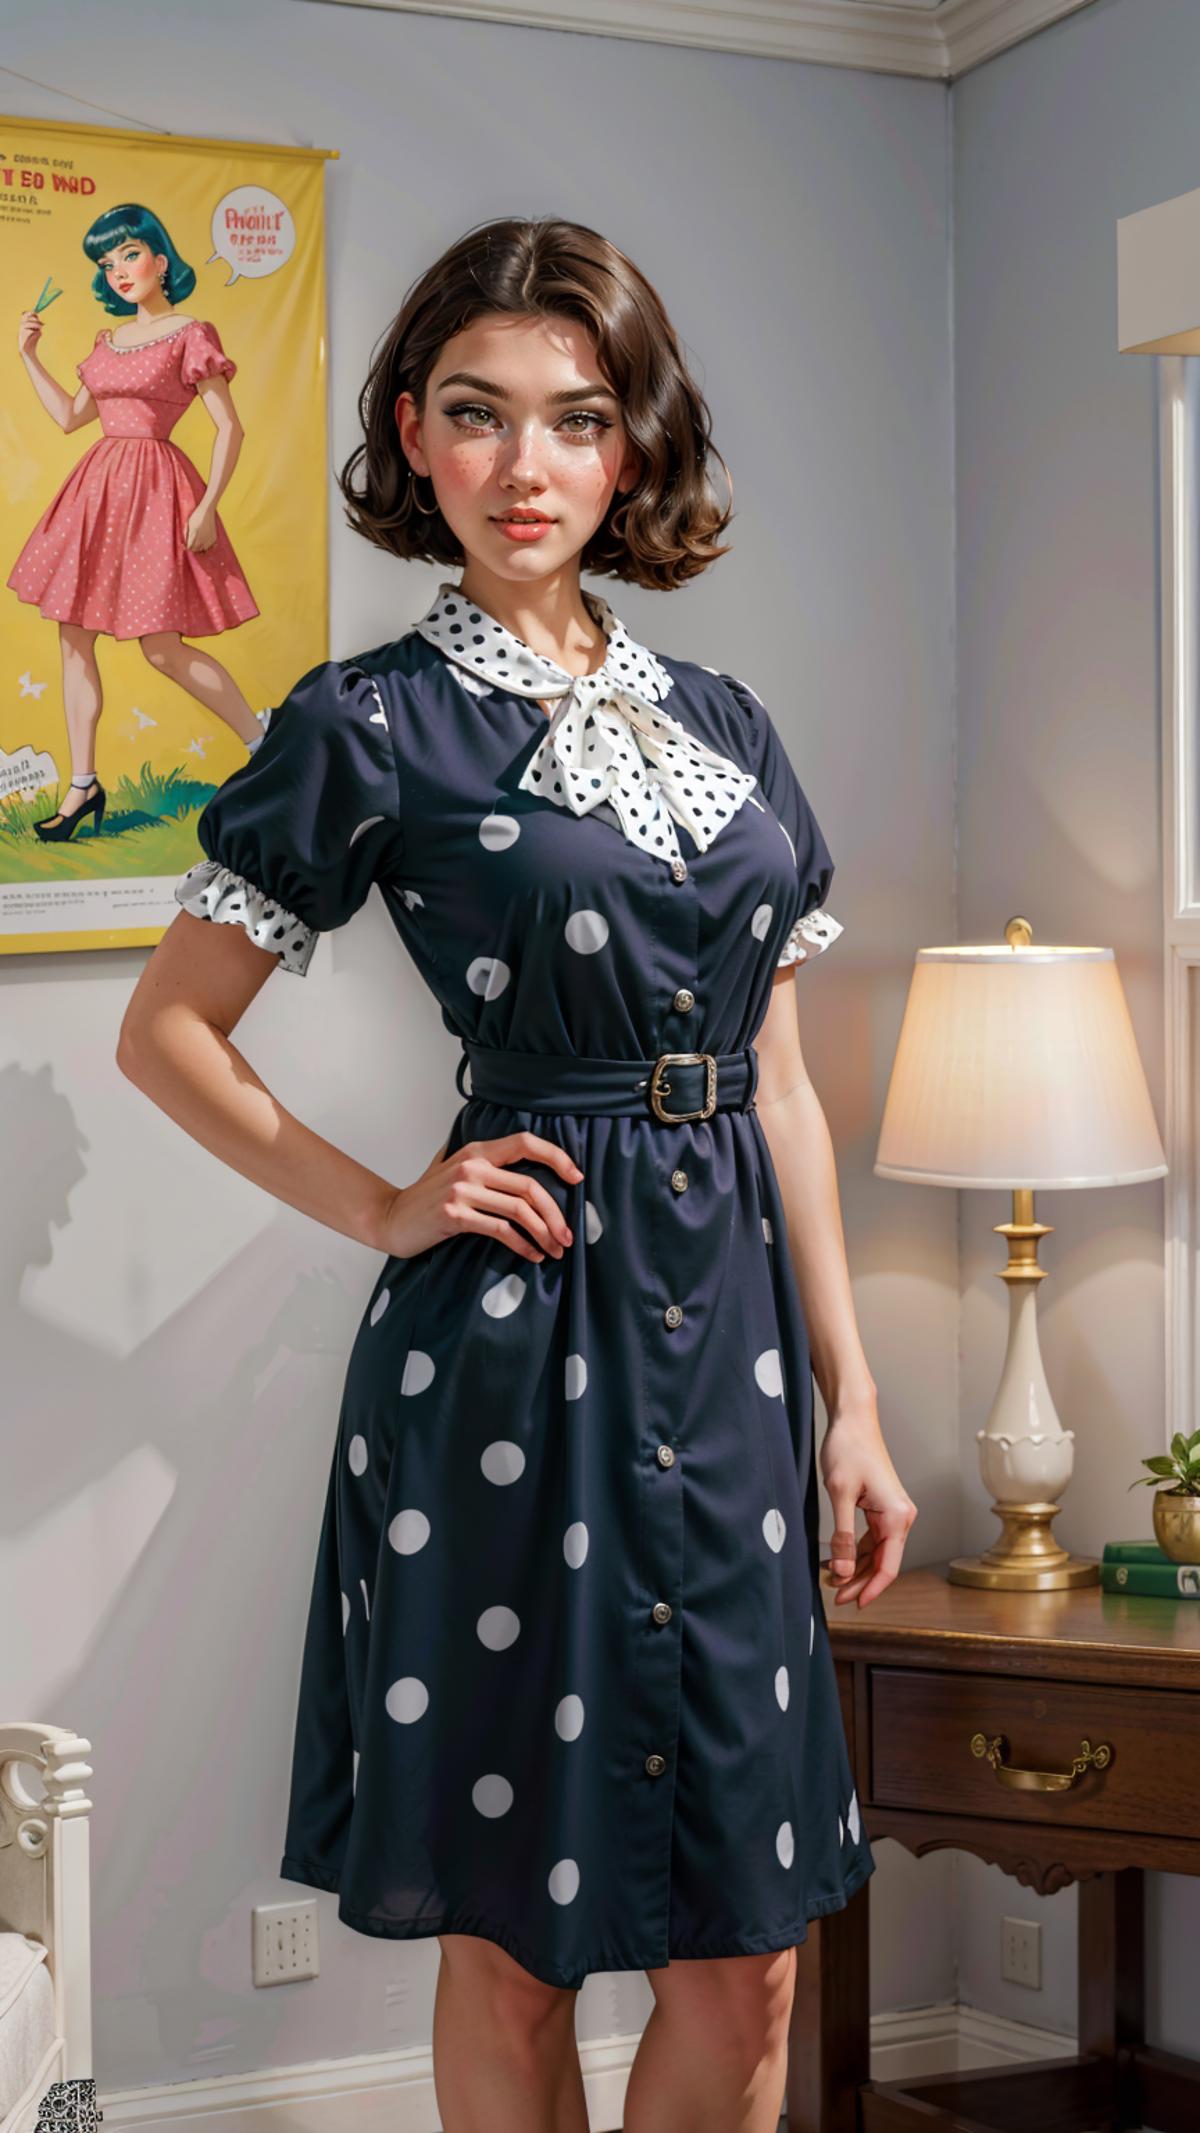 A woman posing in a polka dot dress and a bow tie.